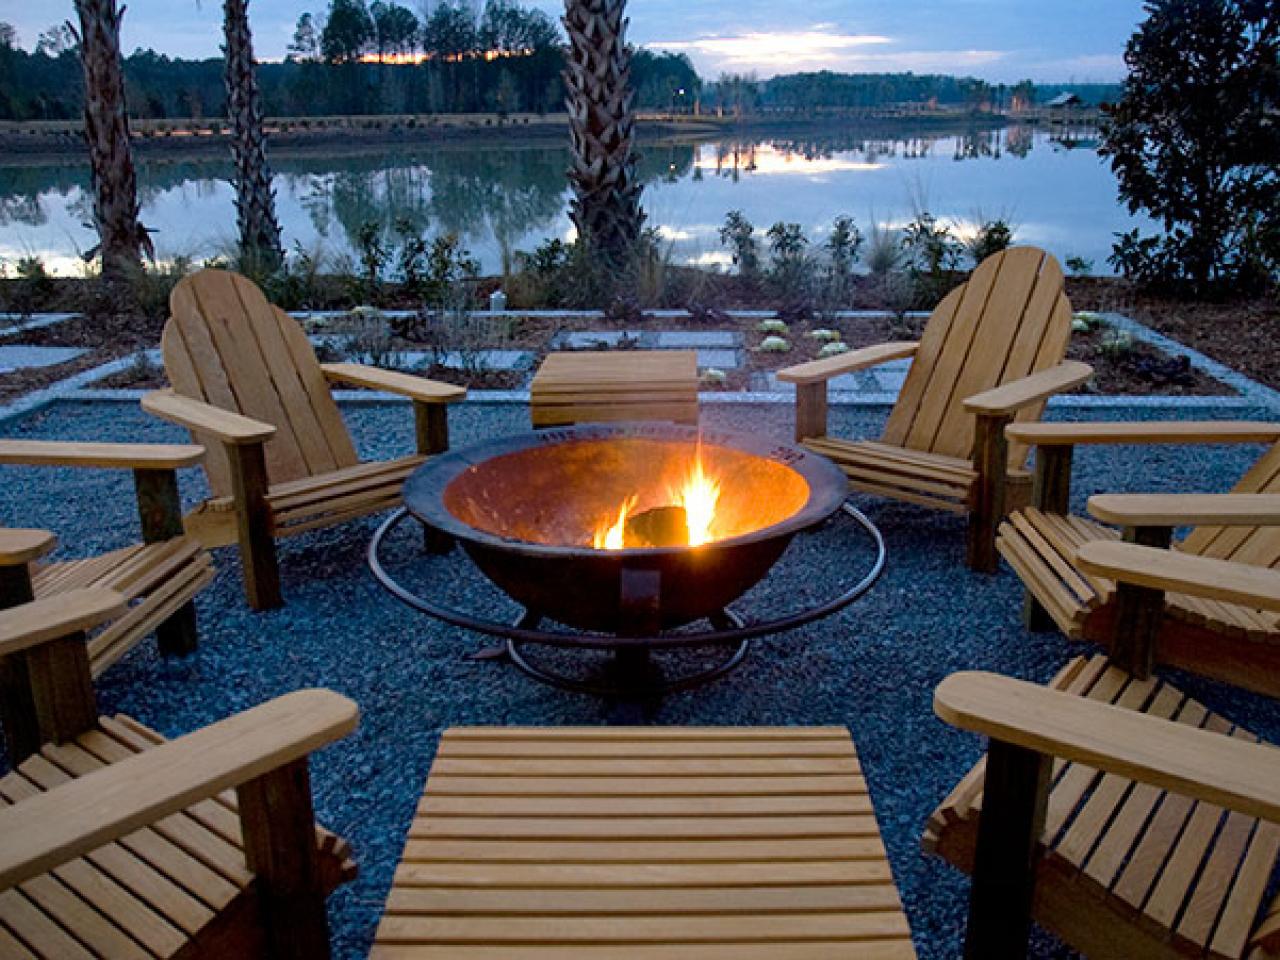 66 Fire Pit And Outdoor Fireplace Ideas, Awesome Fire Pits